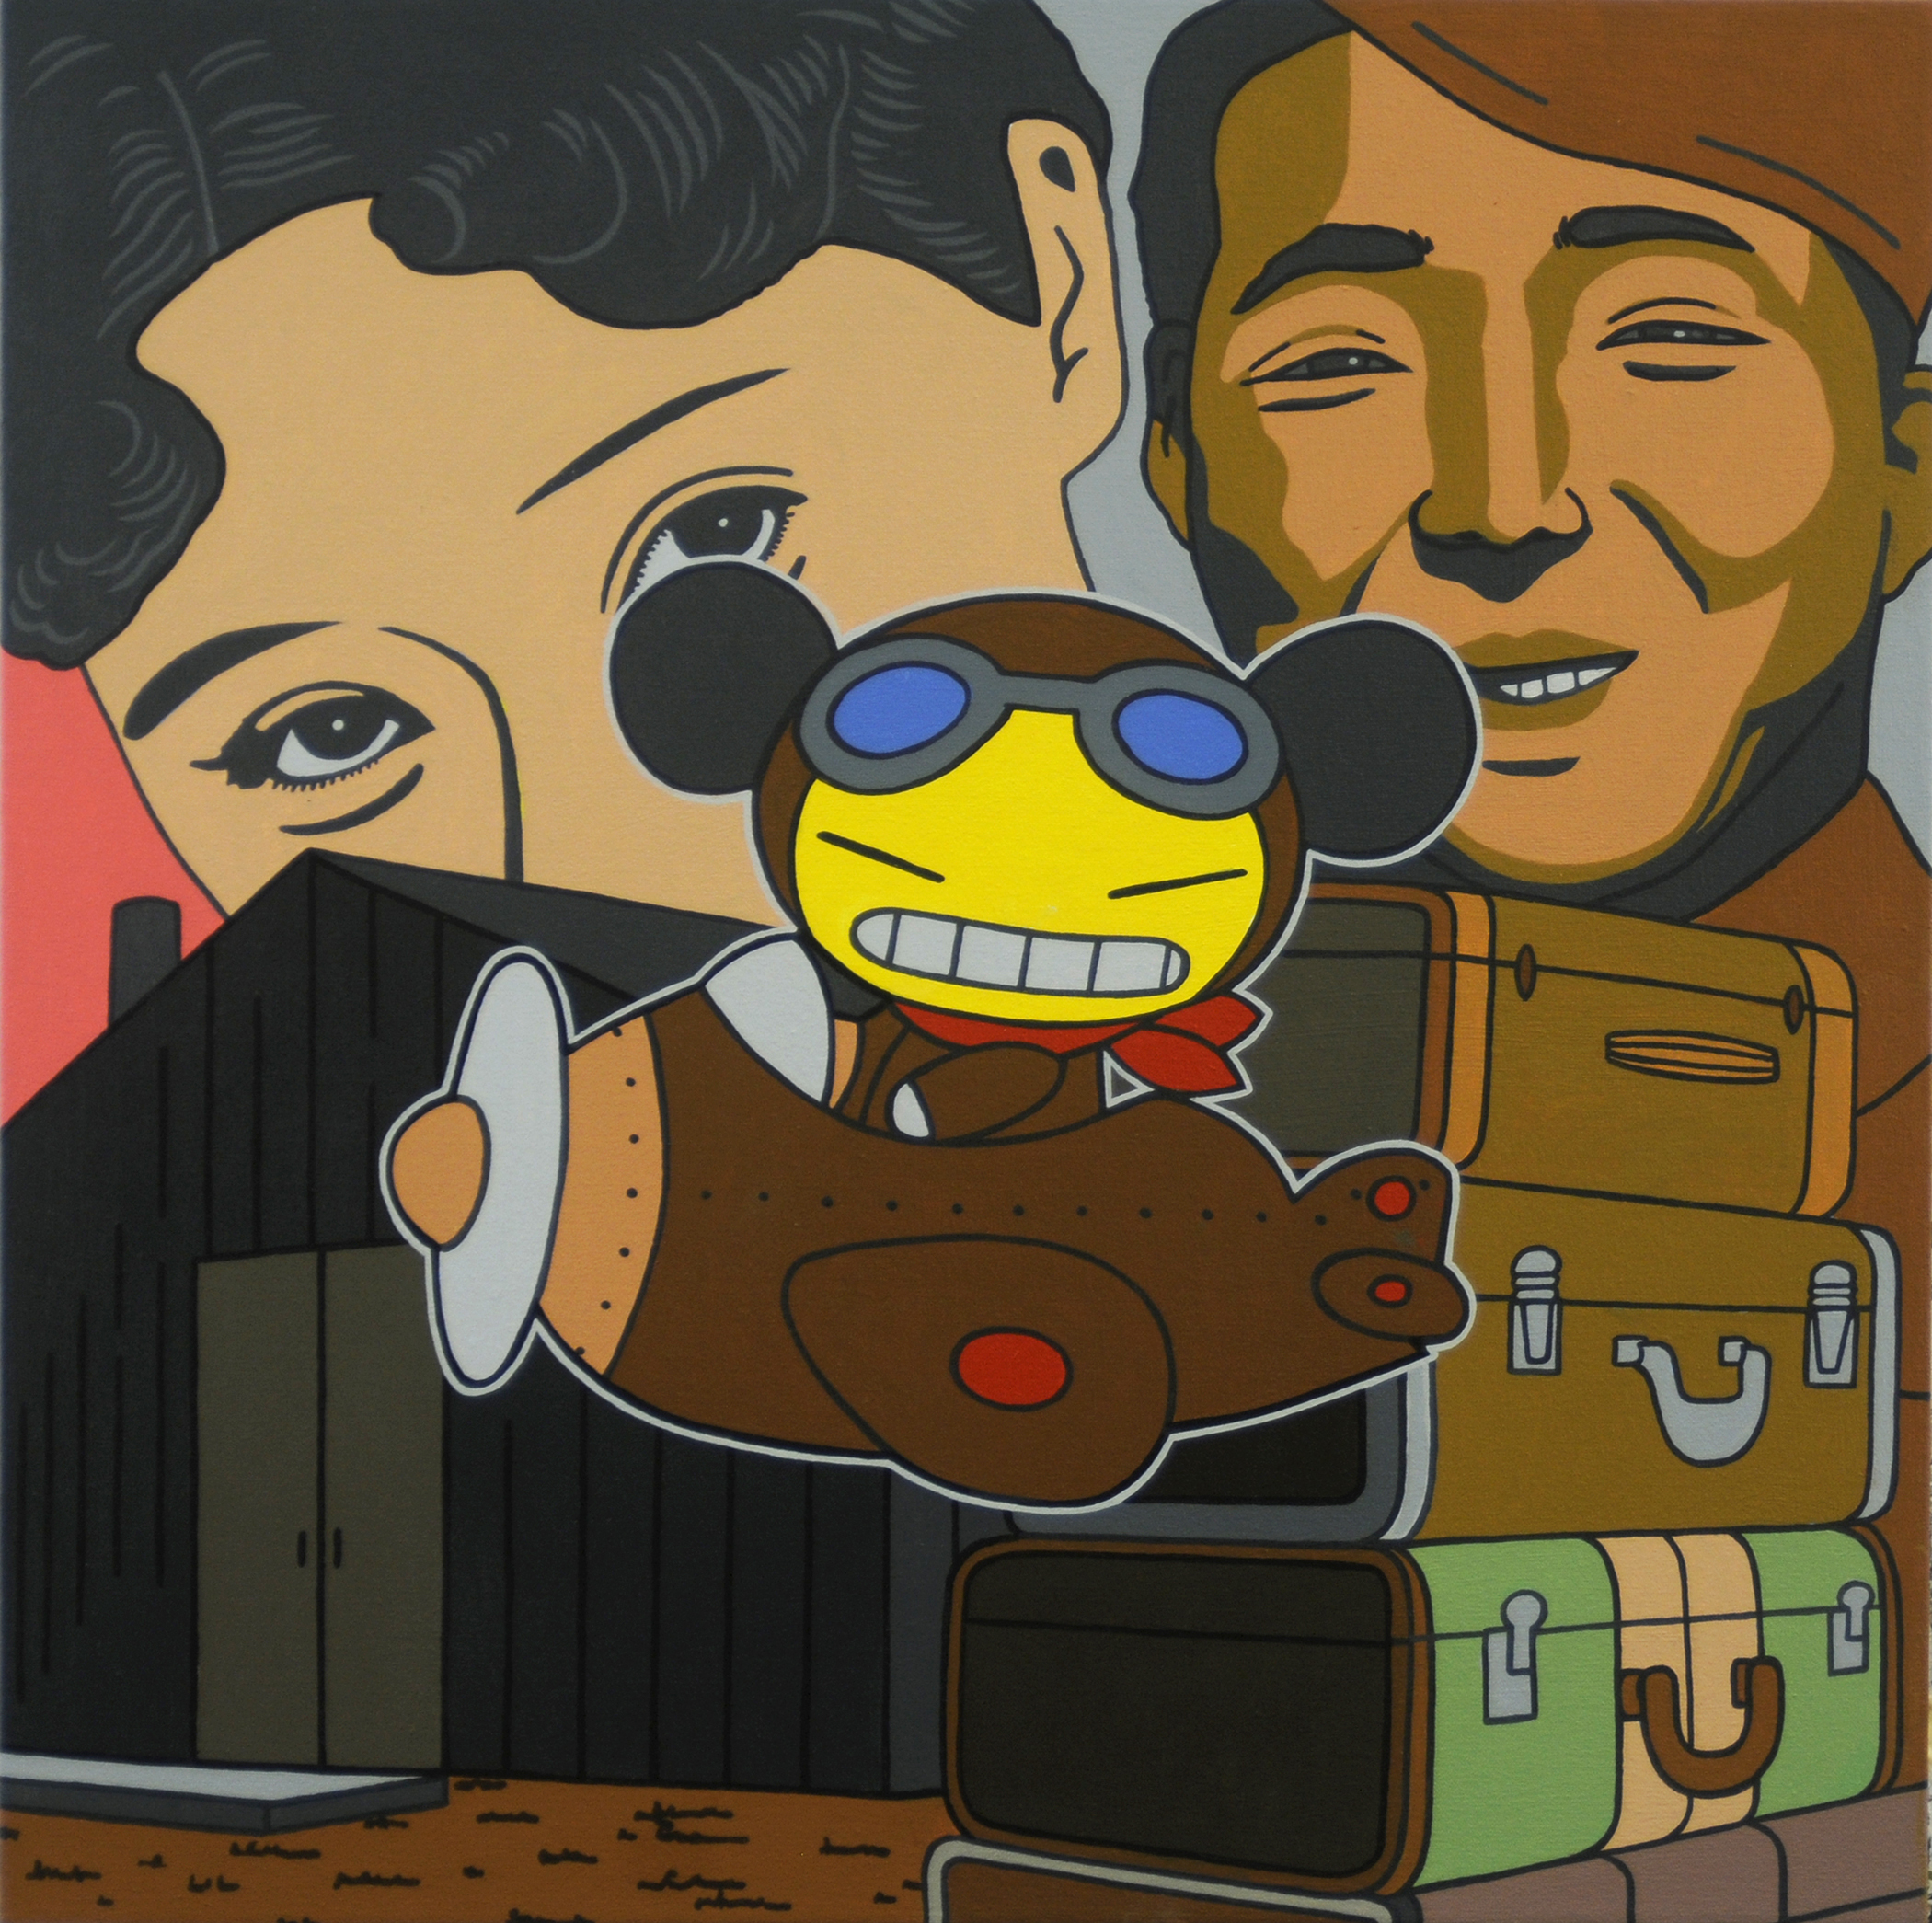 painting of two Japanese people and a stereotyped Japanese fighter pilot